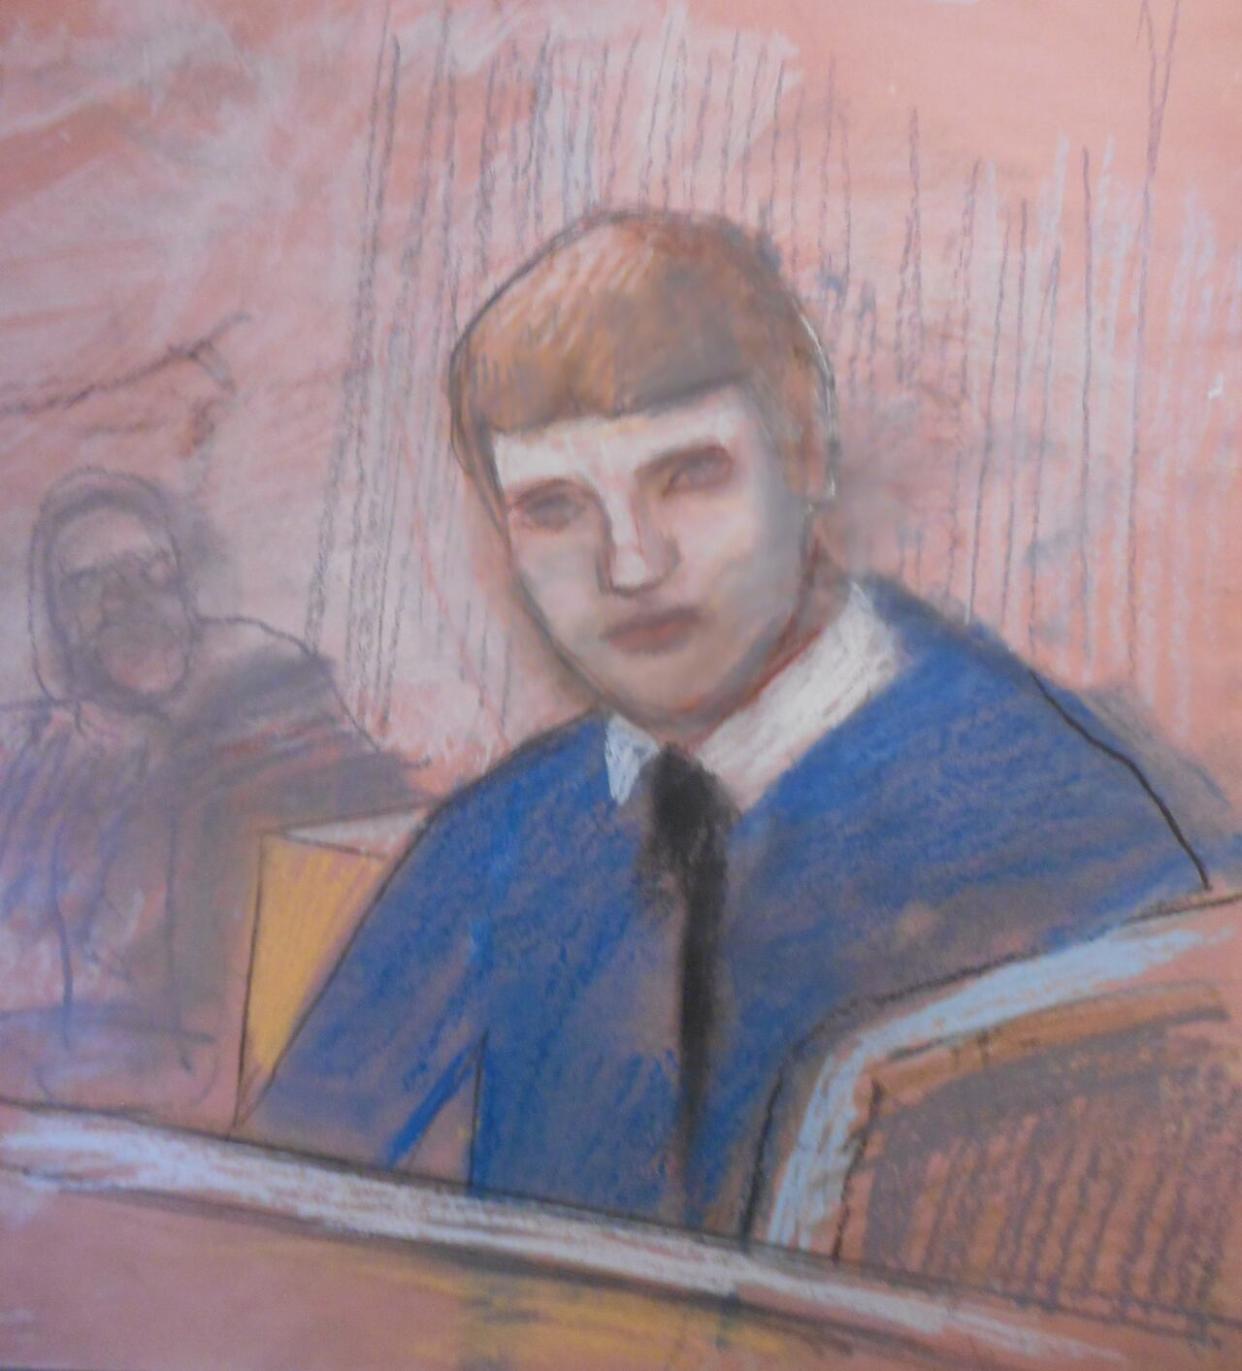 Anthony Bilodeau was convicted of second-degree murder and manslaughter, and sentenced to life in prison with no parole eligibility for 13 years in the deaths of Jacob Sansom and Morris Cardinal. His father, Roger Bilodeau, was found guilty of manslaughter in both deaths. Both men are appealing their convictions. (Jim Stokes - image credit)